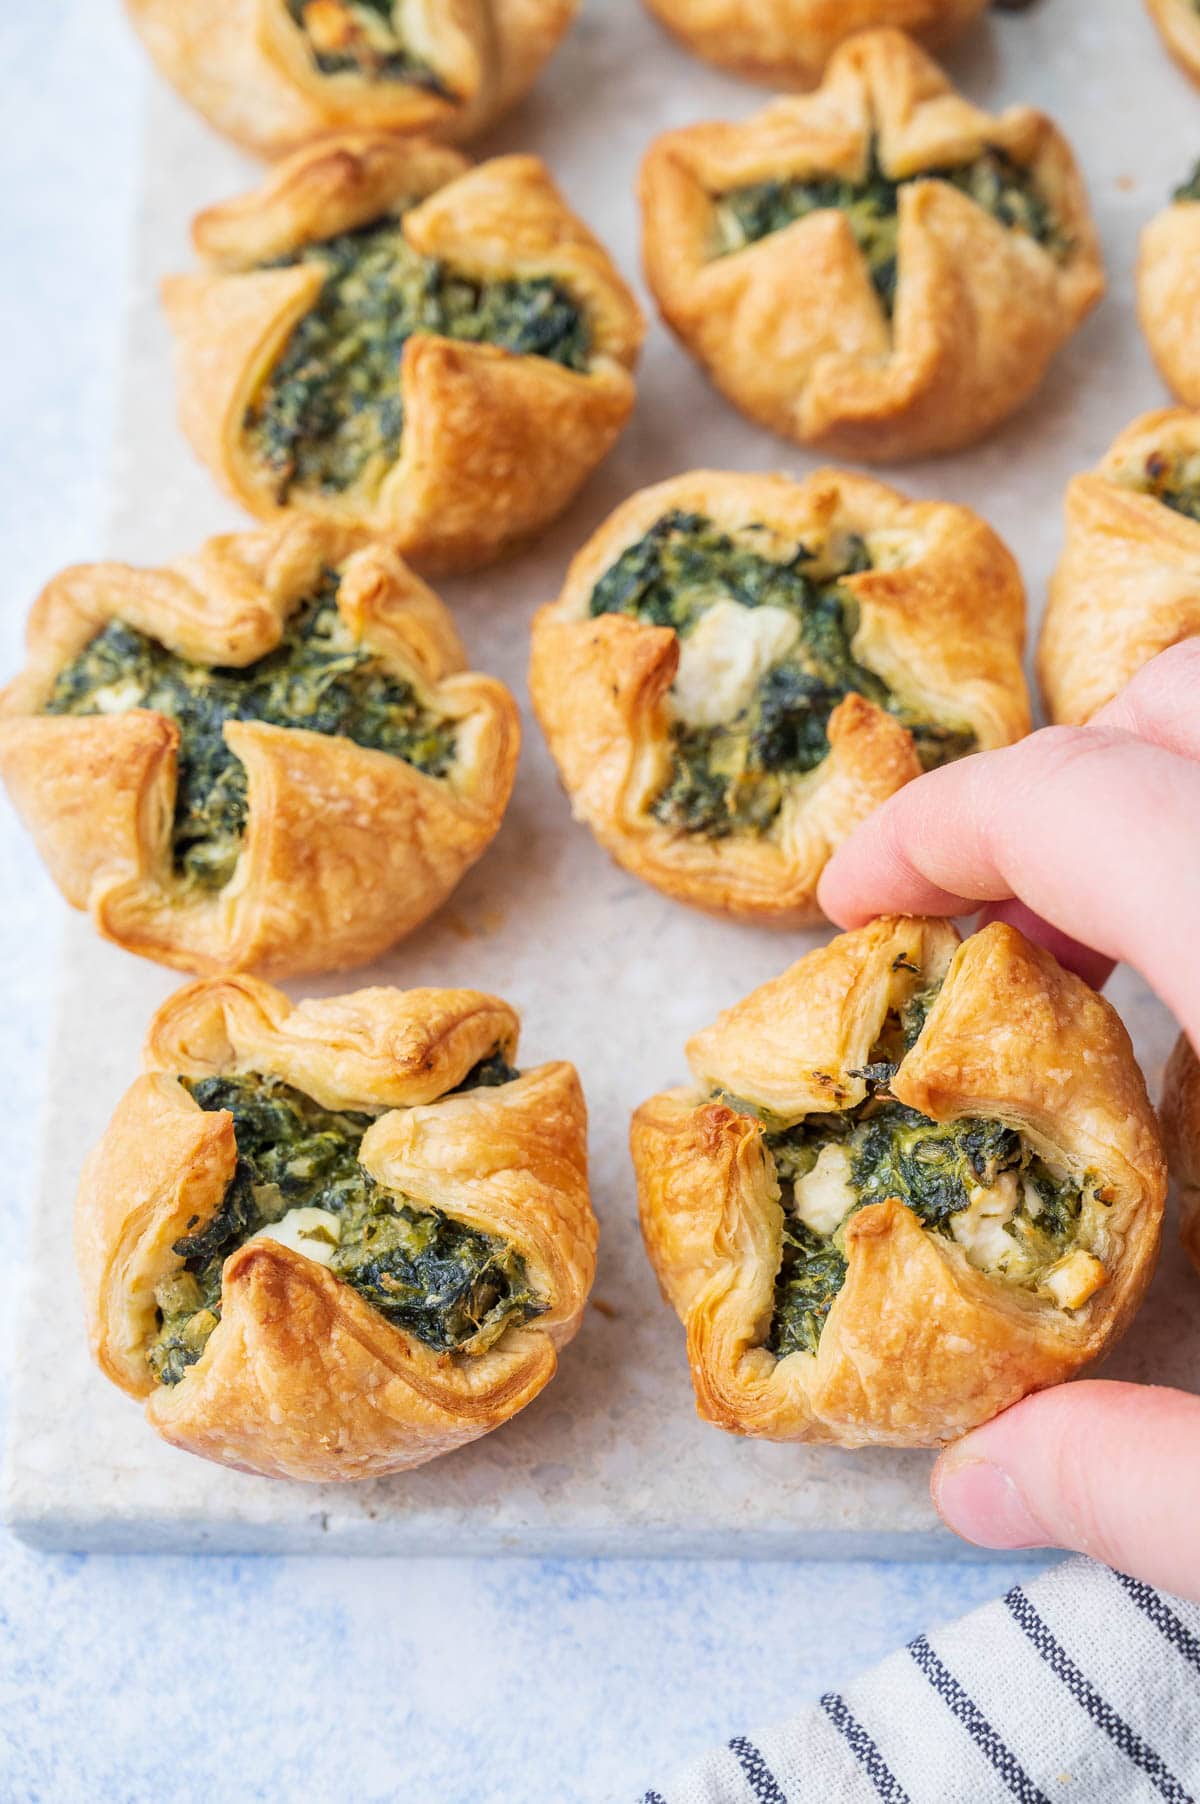 Spinach puffs on a grey stone board. One spinach puff is held in a hand.